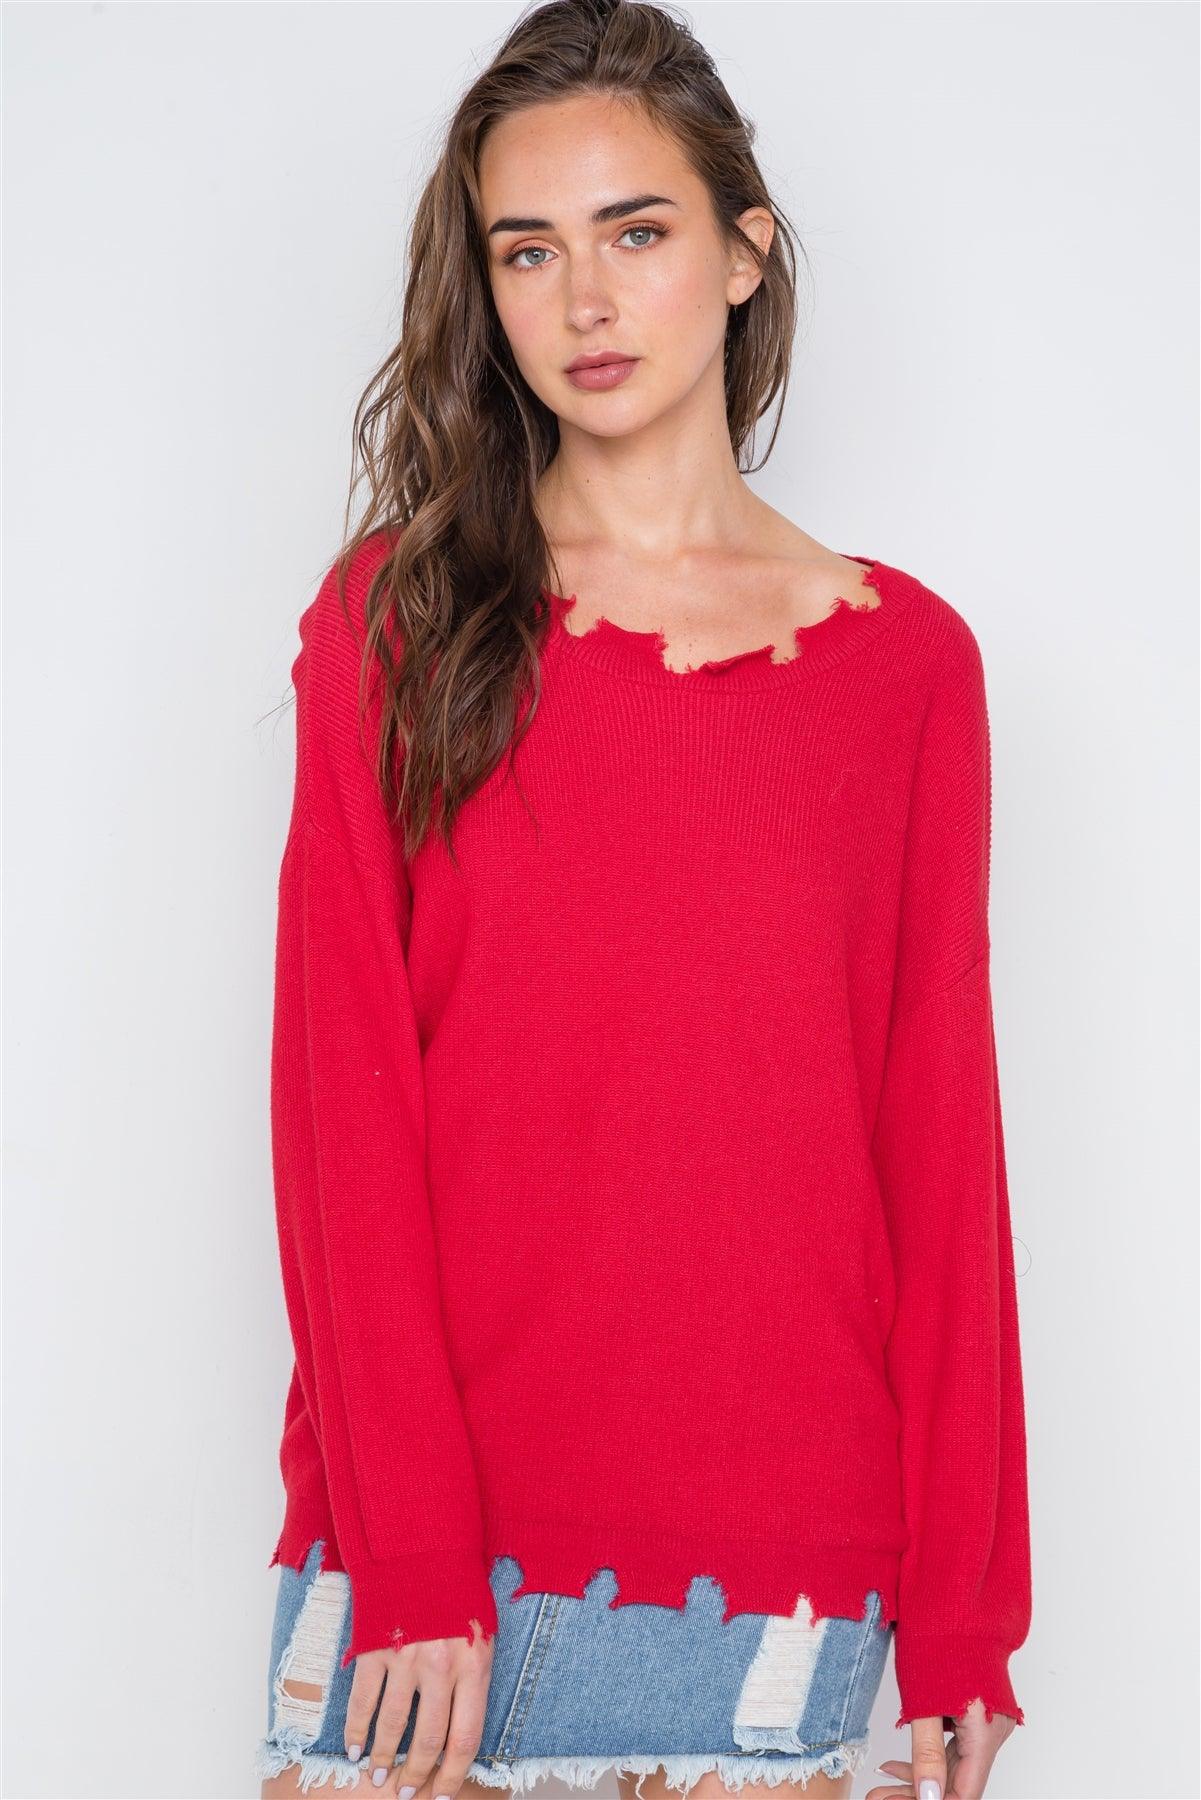 Tomato Red Distressed Pullover lightweight sweater / 3-2-1